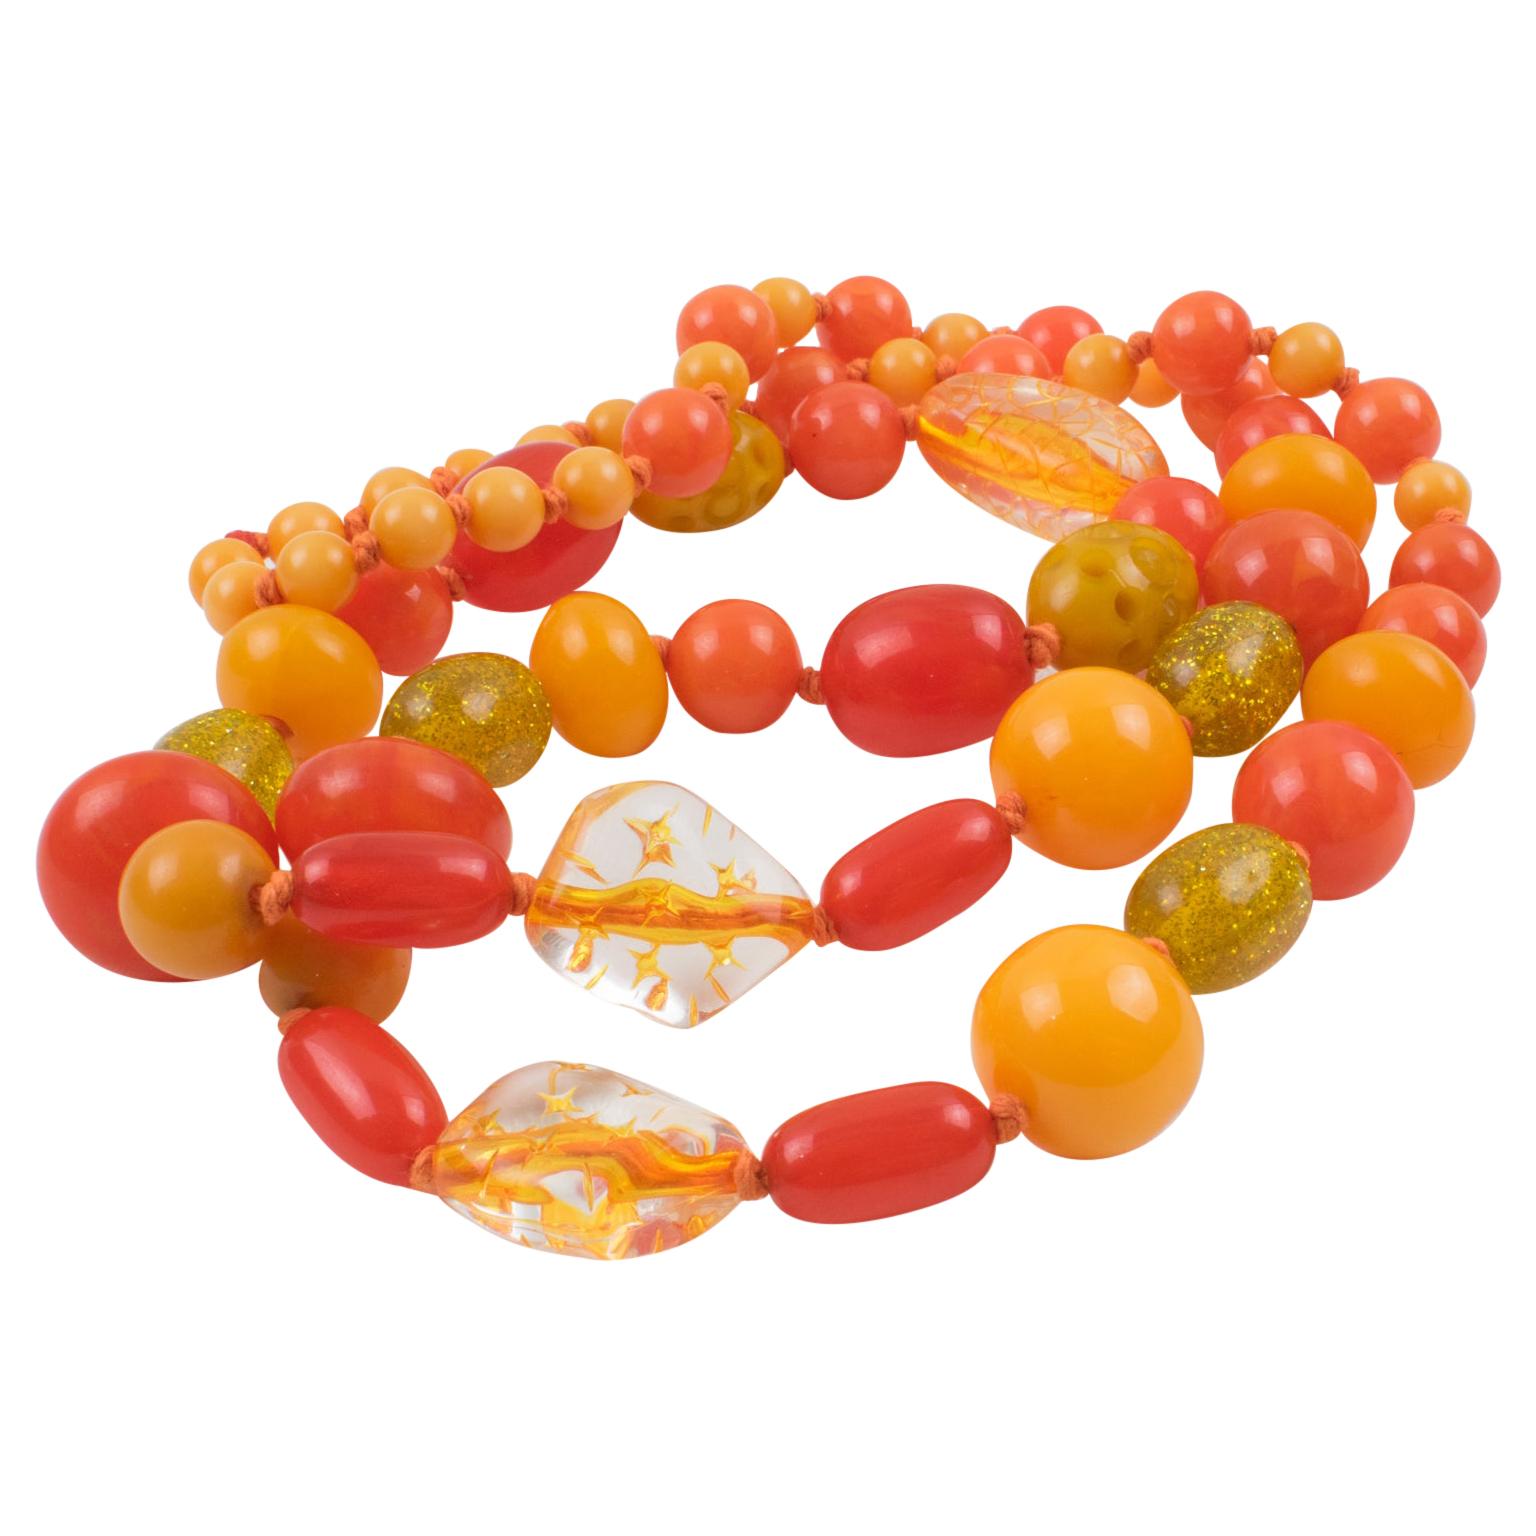 Bakelite and Lucite Long Necklace Sunny Yellow and Orange Colors For Sale